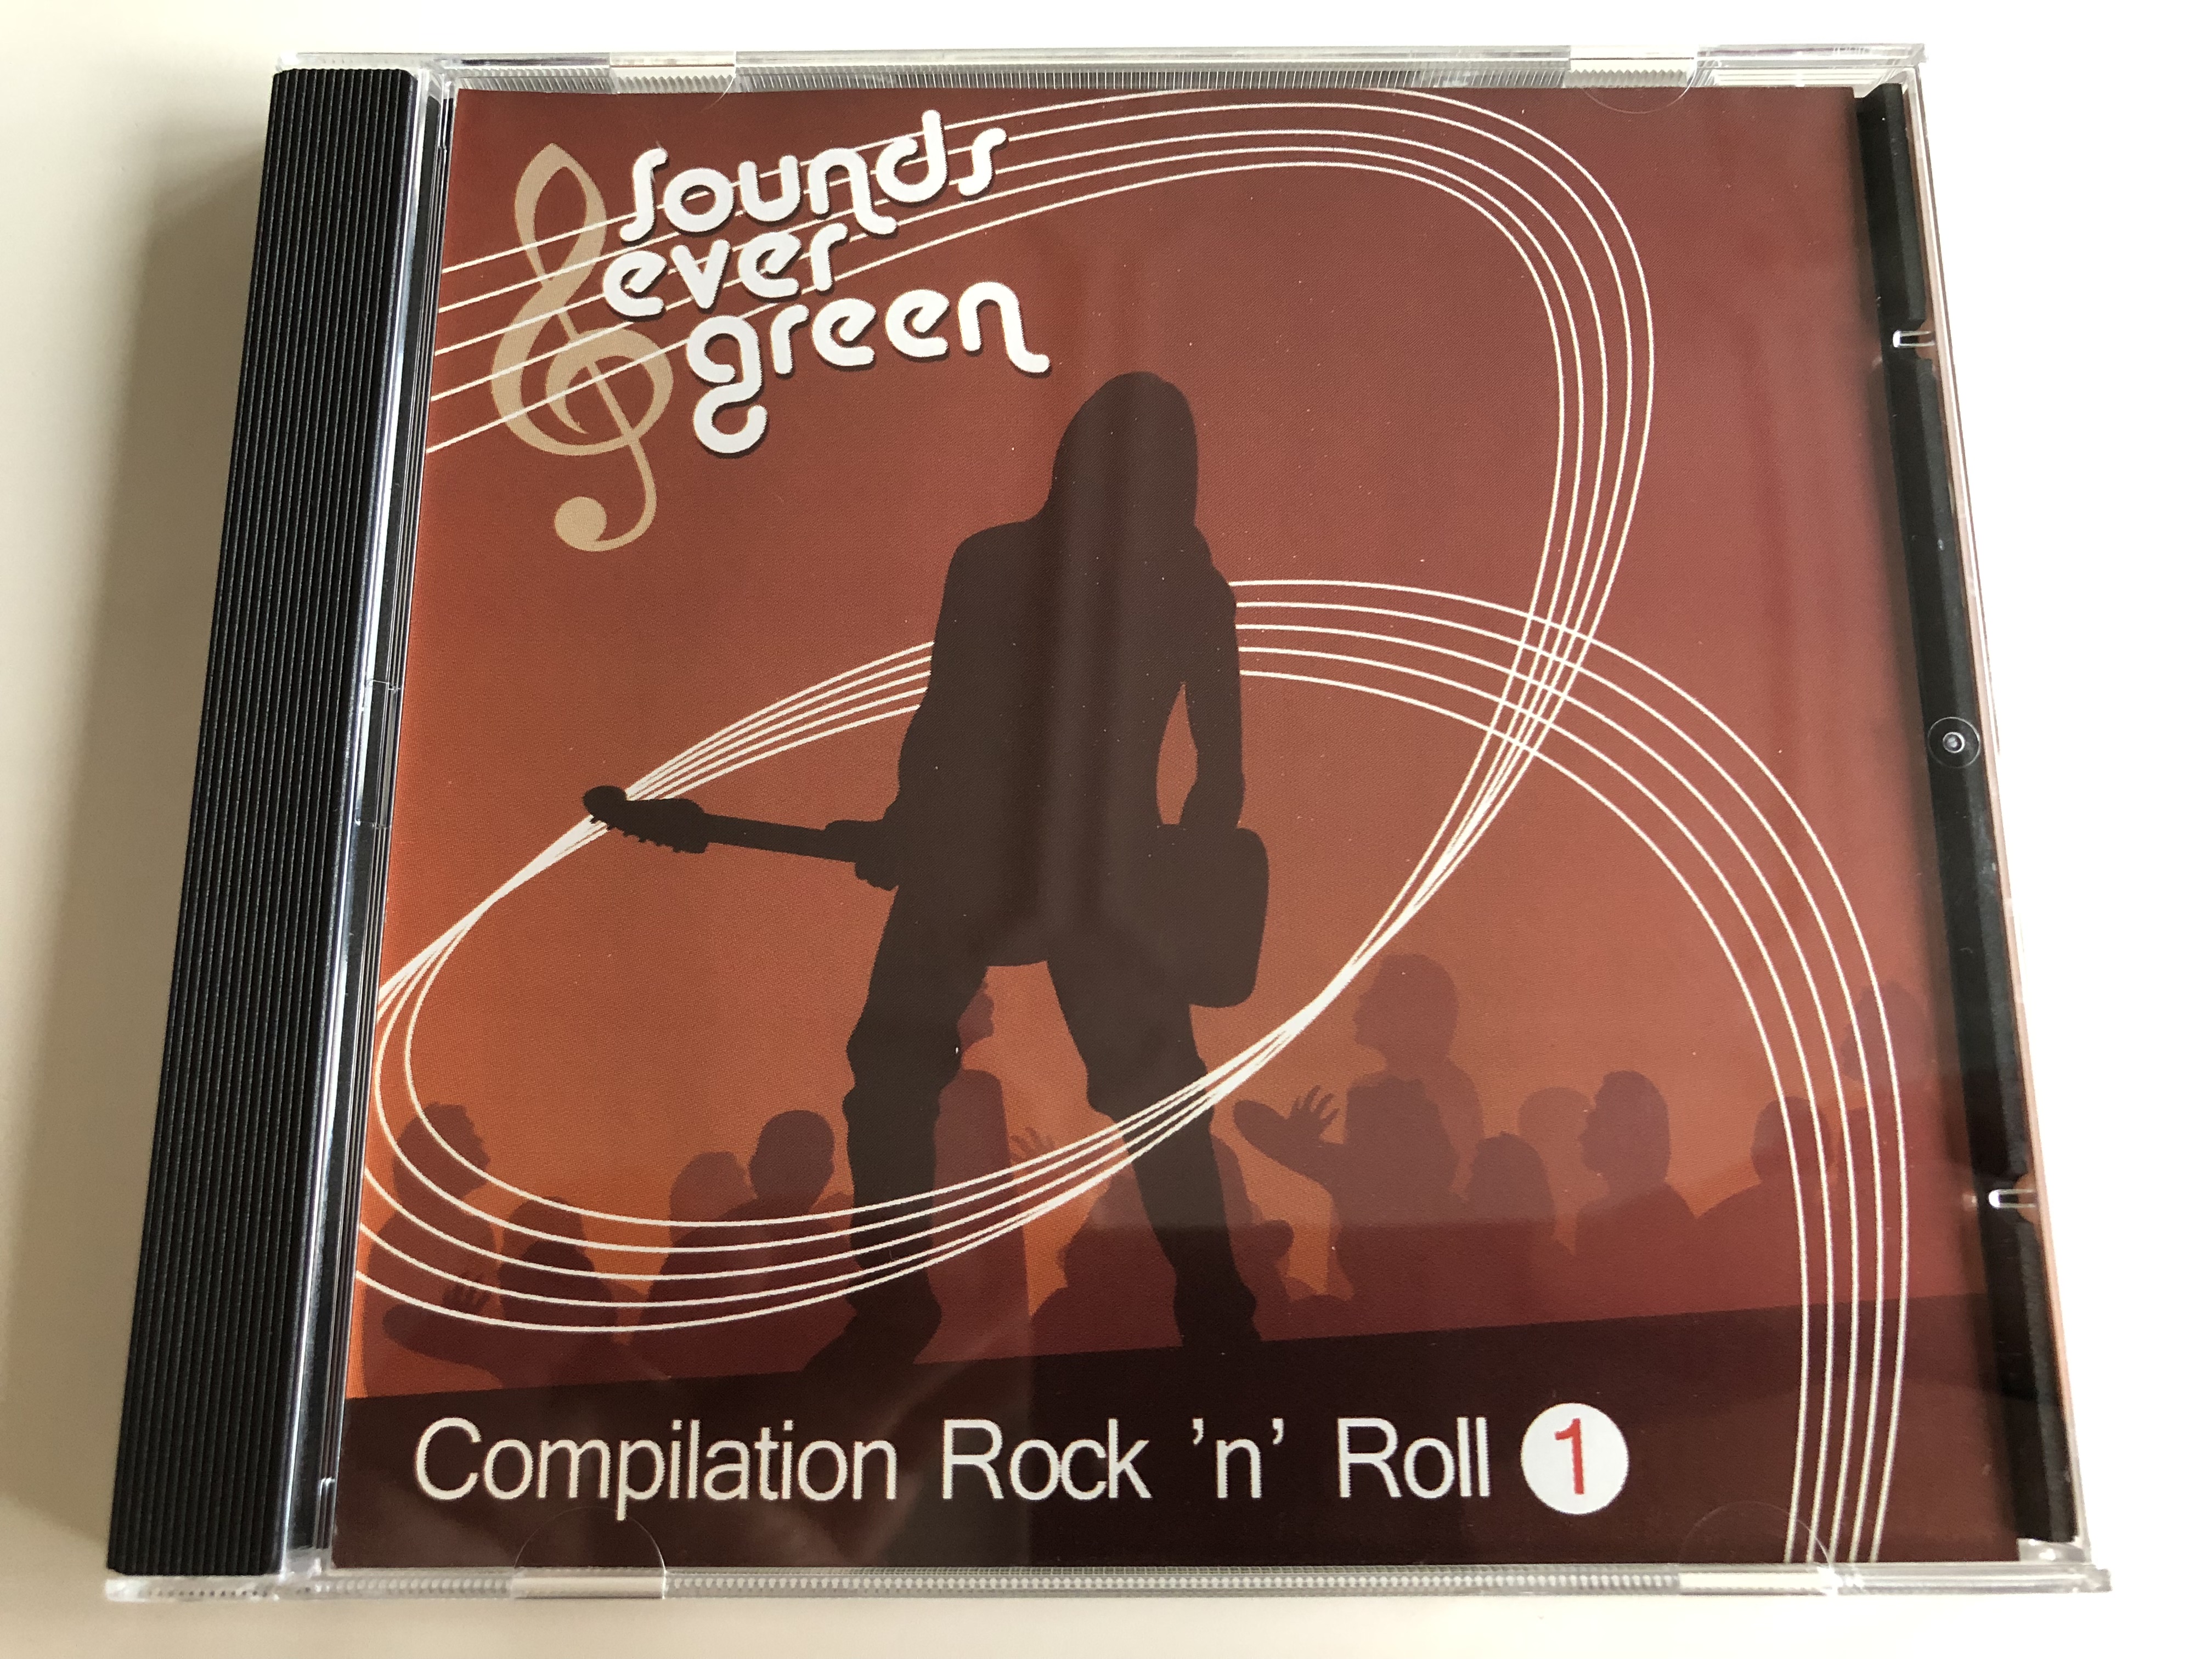 sounds-evergreen-compilation-rock-n-roll-1-sounds-evergreen-audio-cd-2007-nico001-1-.jpg